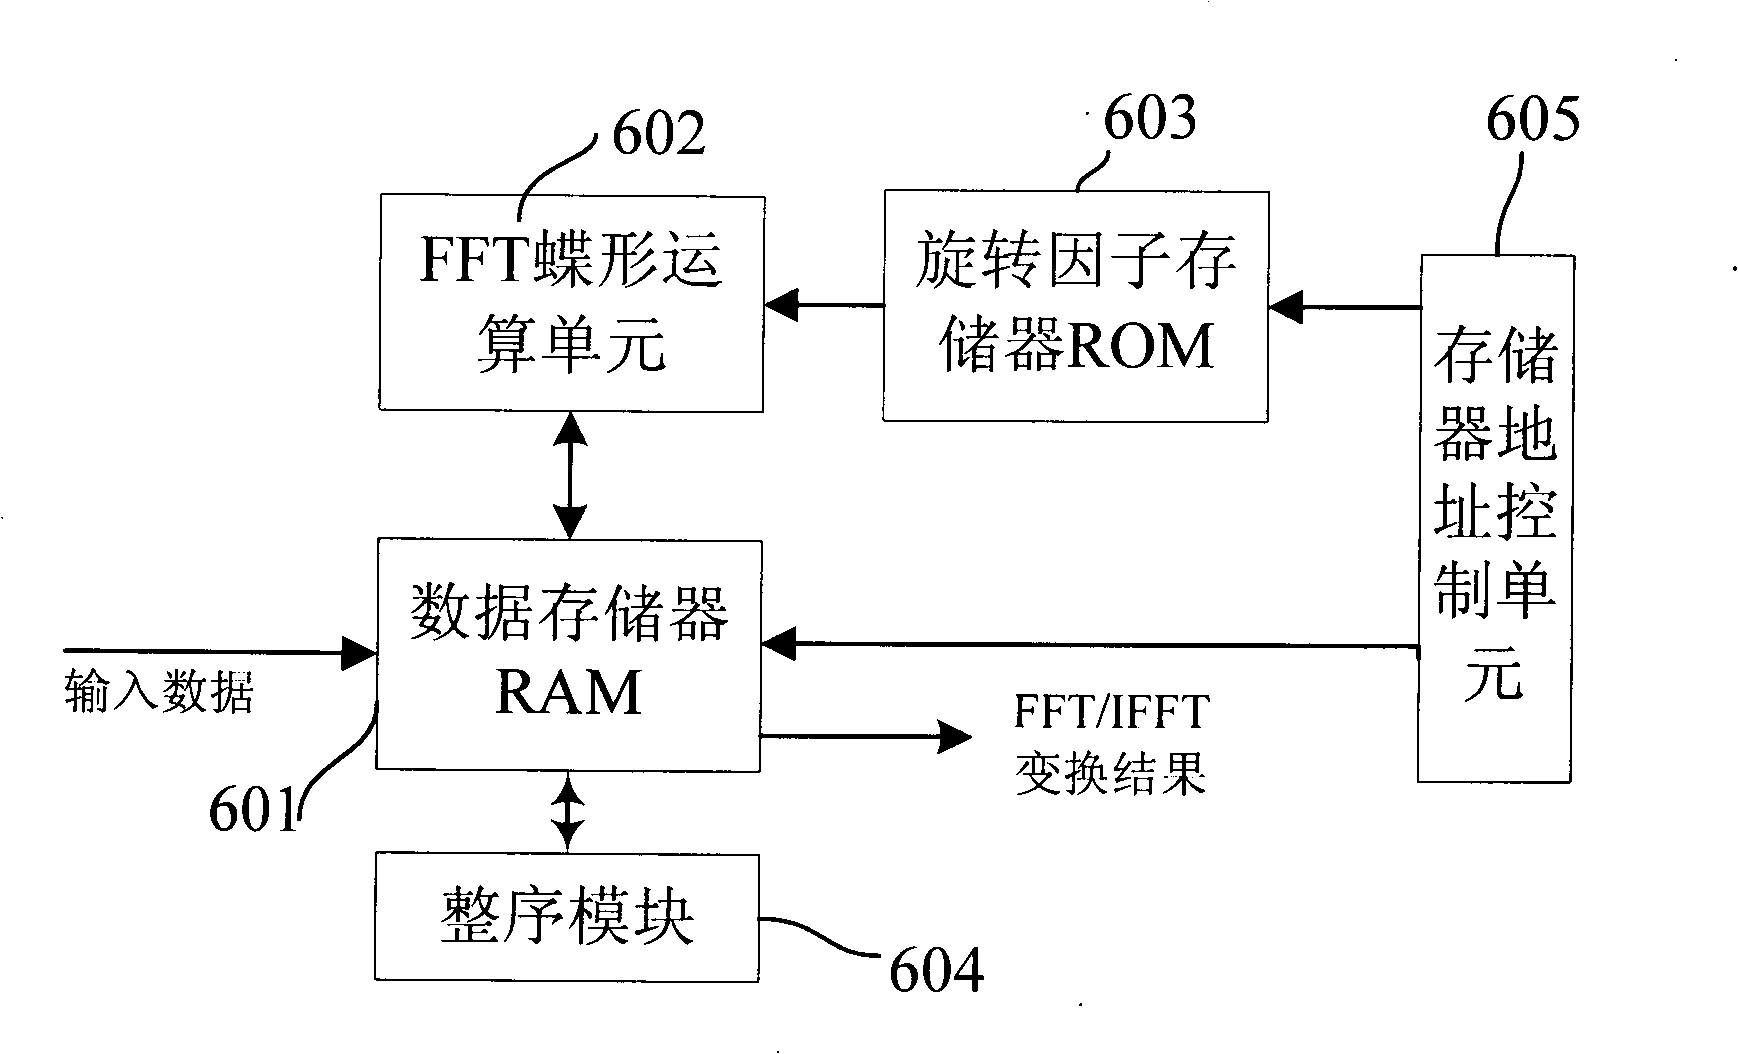 Butterfly-shaped operation FFT processor